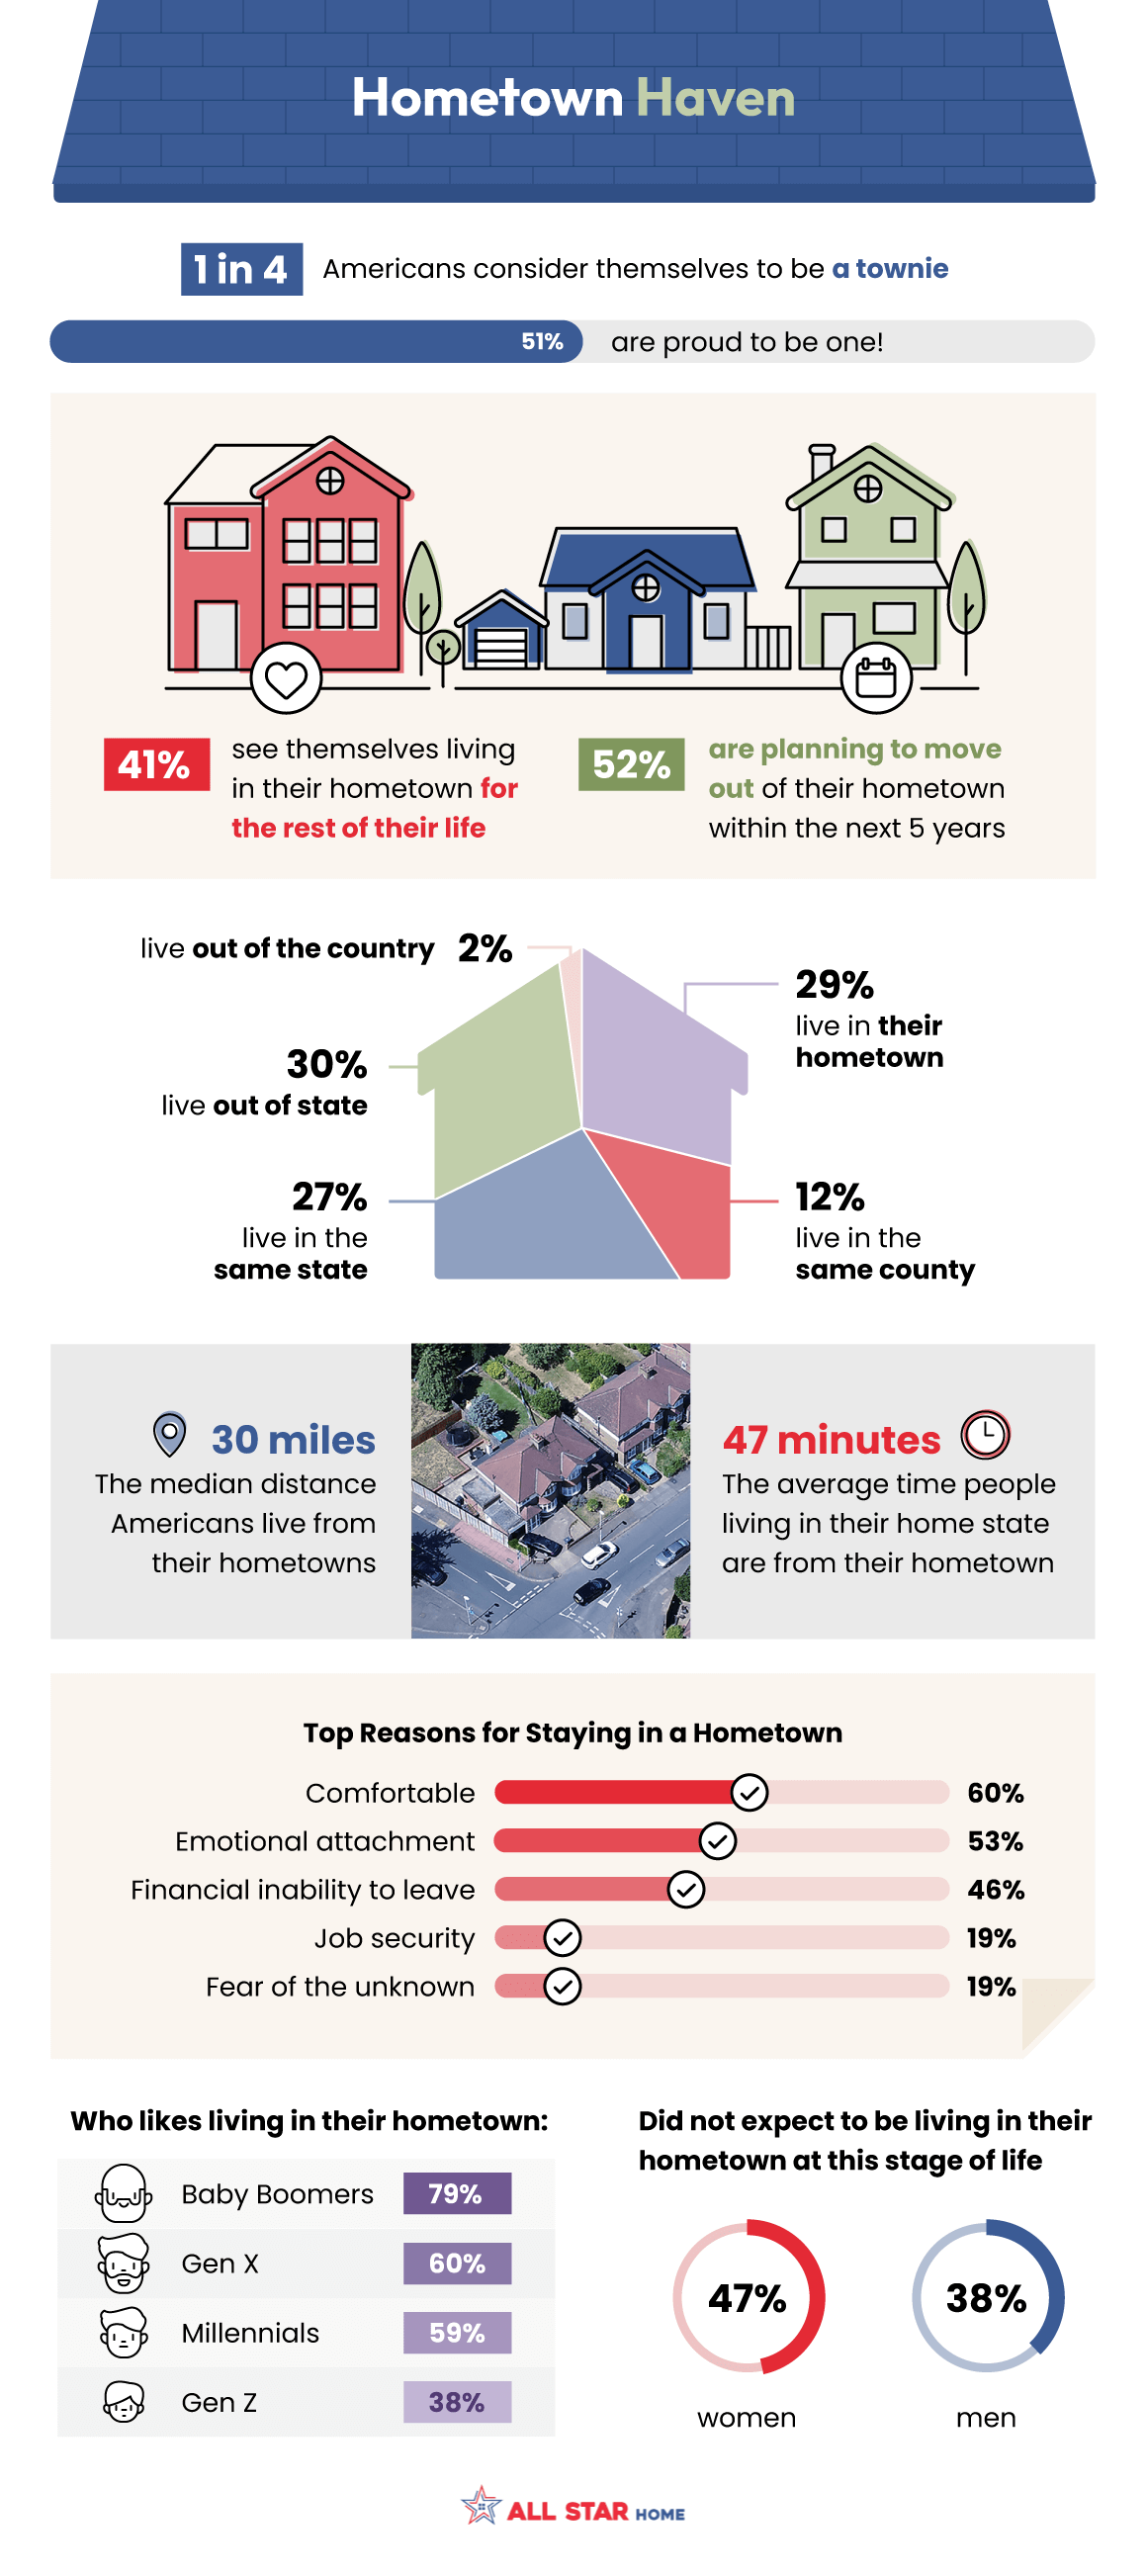 Hometown Haven [ INFOGRAPHIC]

1 in 4 Americans consider themselves to be a townie.

41% see themselves living in their hometown for the rest of their life.

52% are planning to move out of their hometown within the next 5 years.

30 miles the median distance Americans live from their hometowns.

47 minutes the average time people living in their home state are from their hometown.

Top Reasons for Staying in a Hometown

Comfortable, Emotional Attachment, Financial inability to leave, Job Security, and Fear of the unknown.

Who likes living in their hometown:

- Baby Boomers 79%
- Gen X 60%
- Millennials 59%
- Gen Z 38%

Did not expect to be living in their hometown at this stage of life

47% women & 38% men